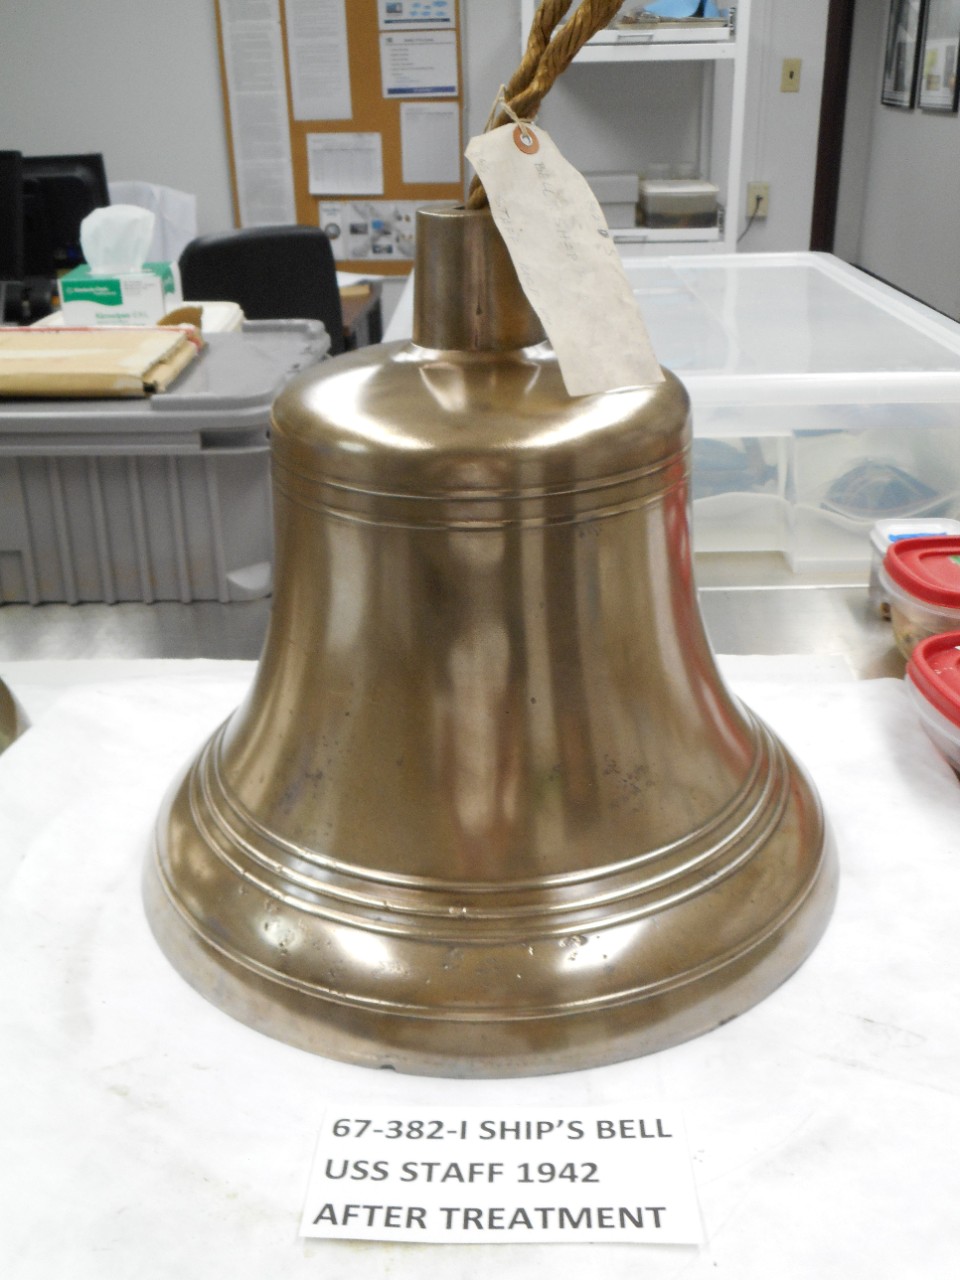 Ship's bell from USS Staff. Bell is shiny brass.